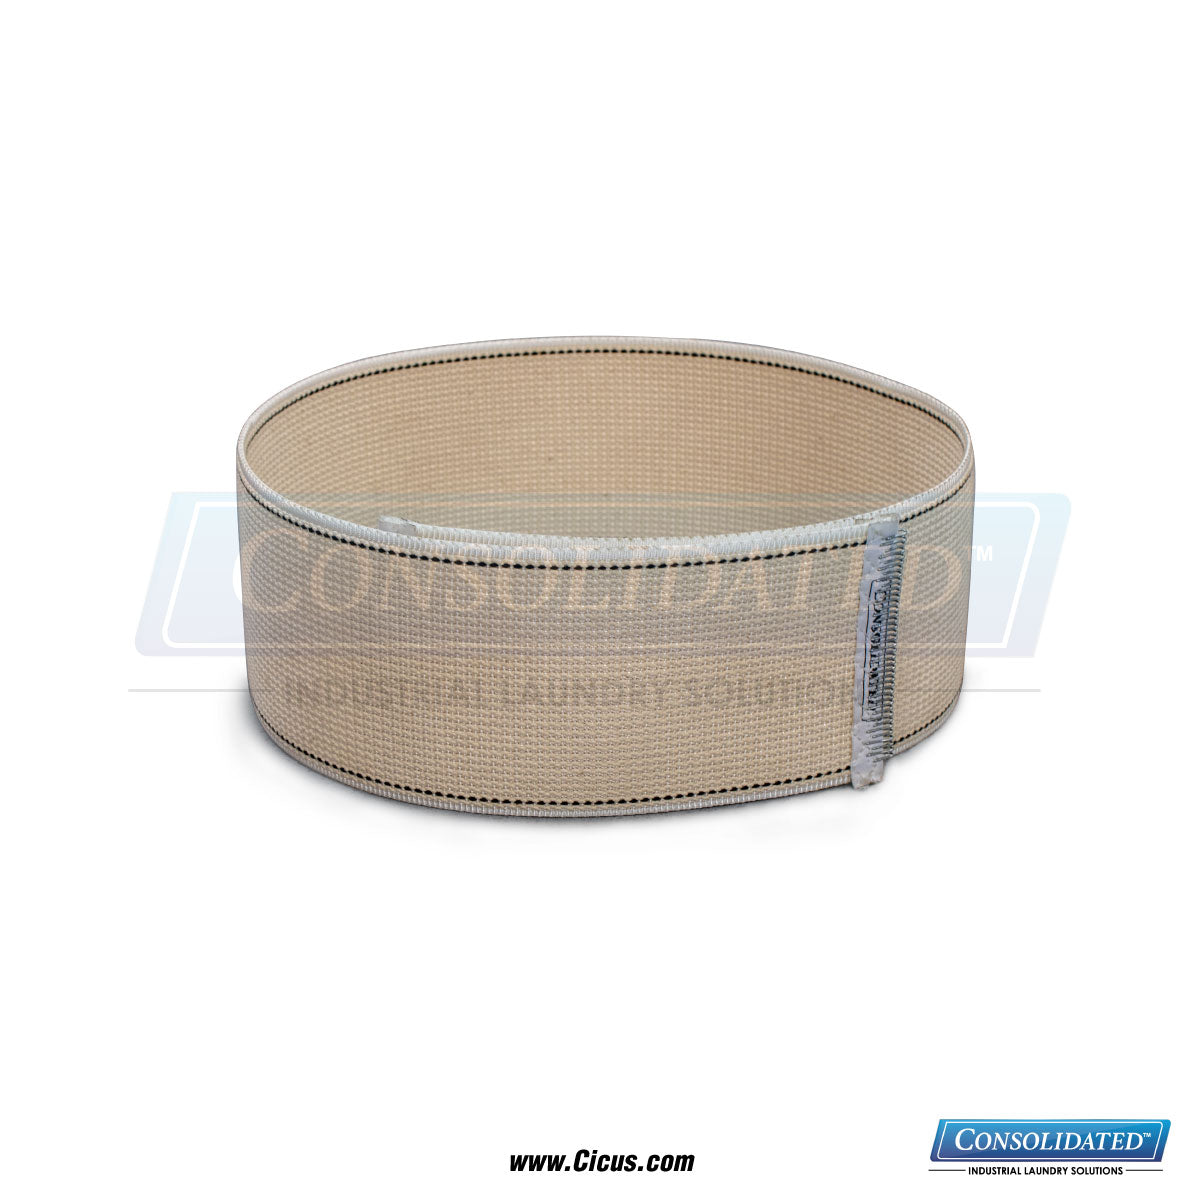 CIC Exclusive Chicago Dryer Canvas Ribbon - 2" x 114" (1001-113)